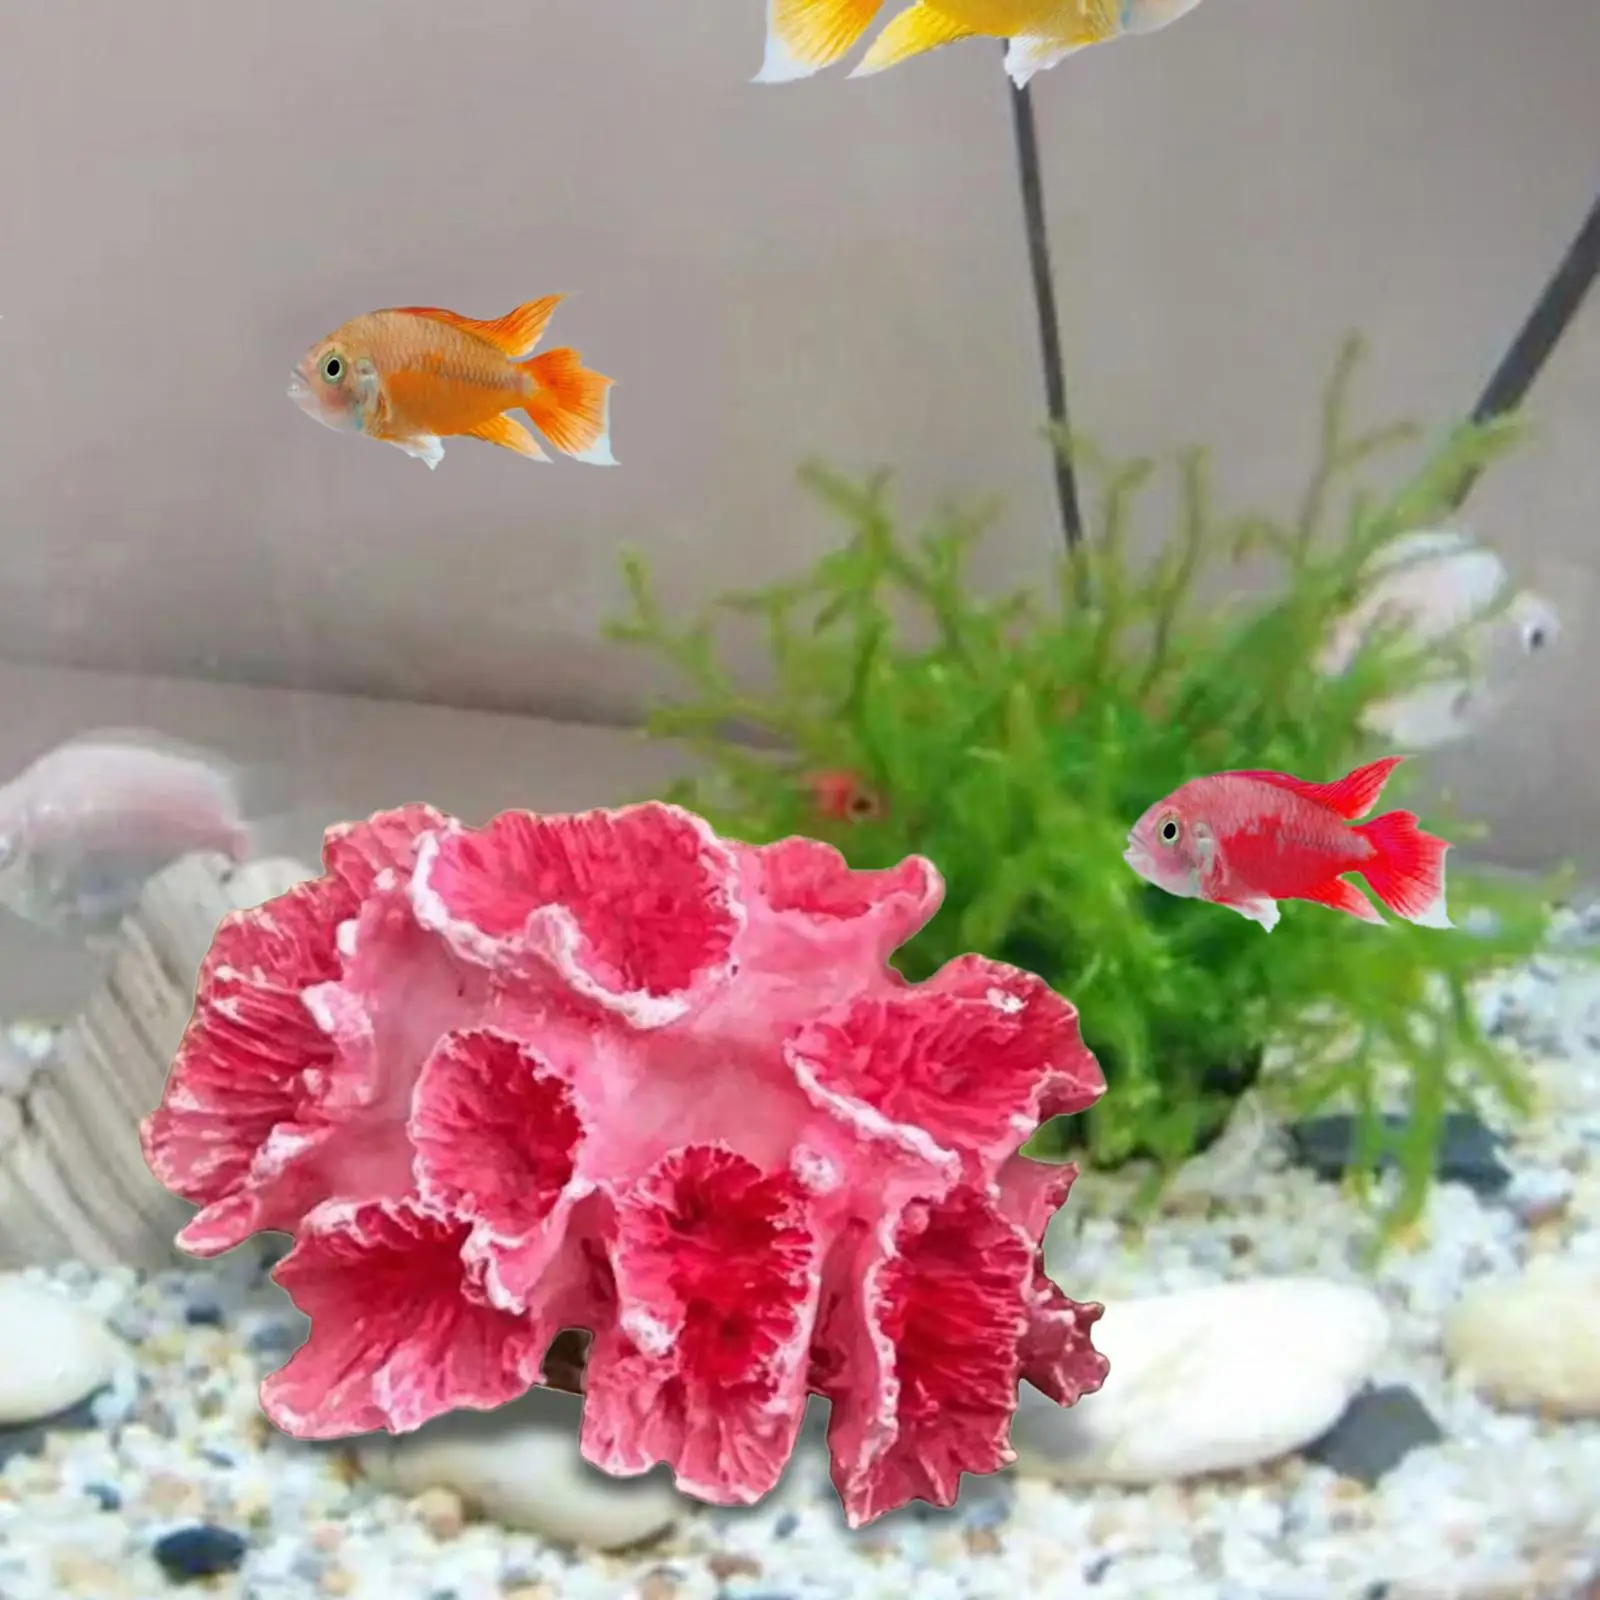 Artificial Coral Scenery Handicraft Resin Compact for Fish Tank Office Home